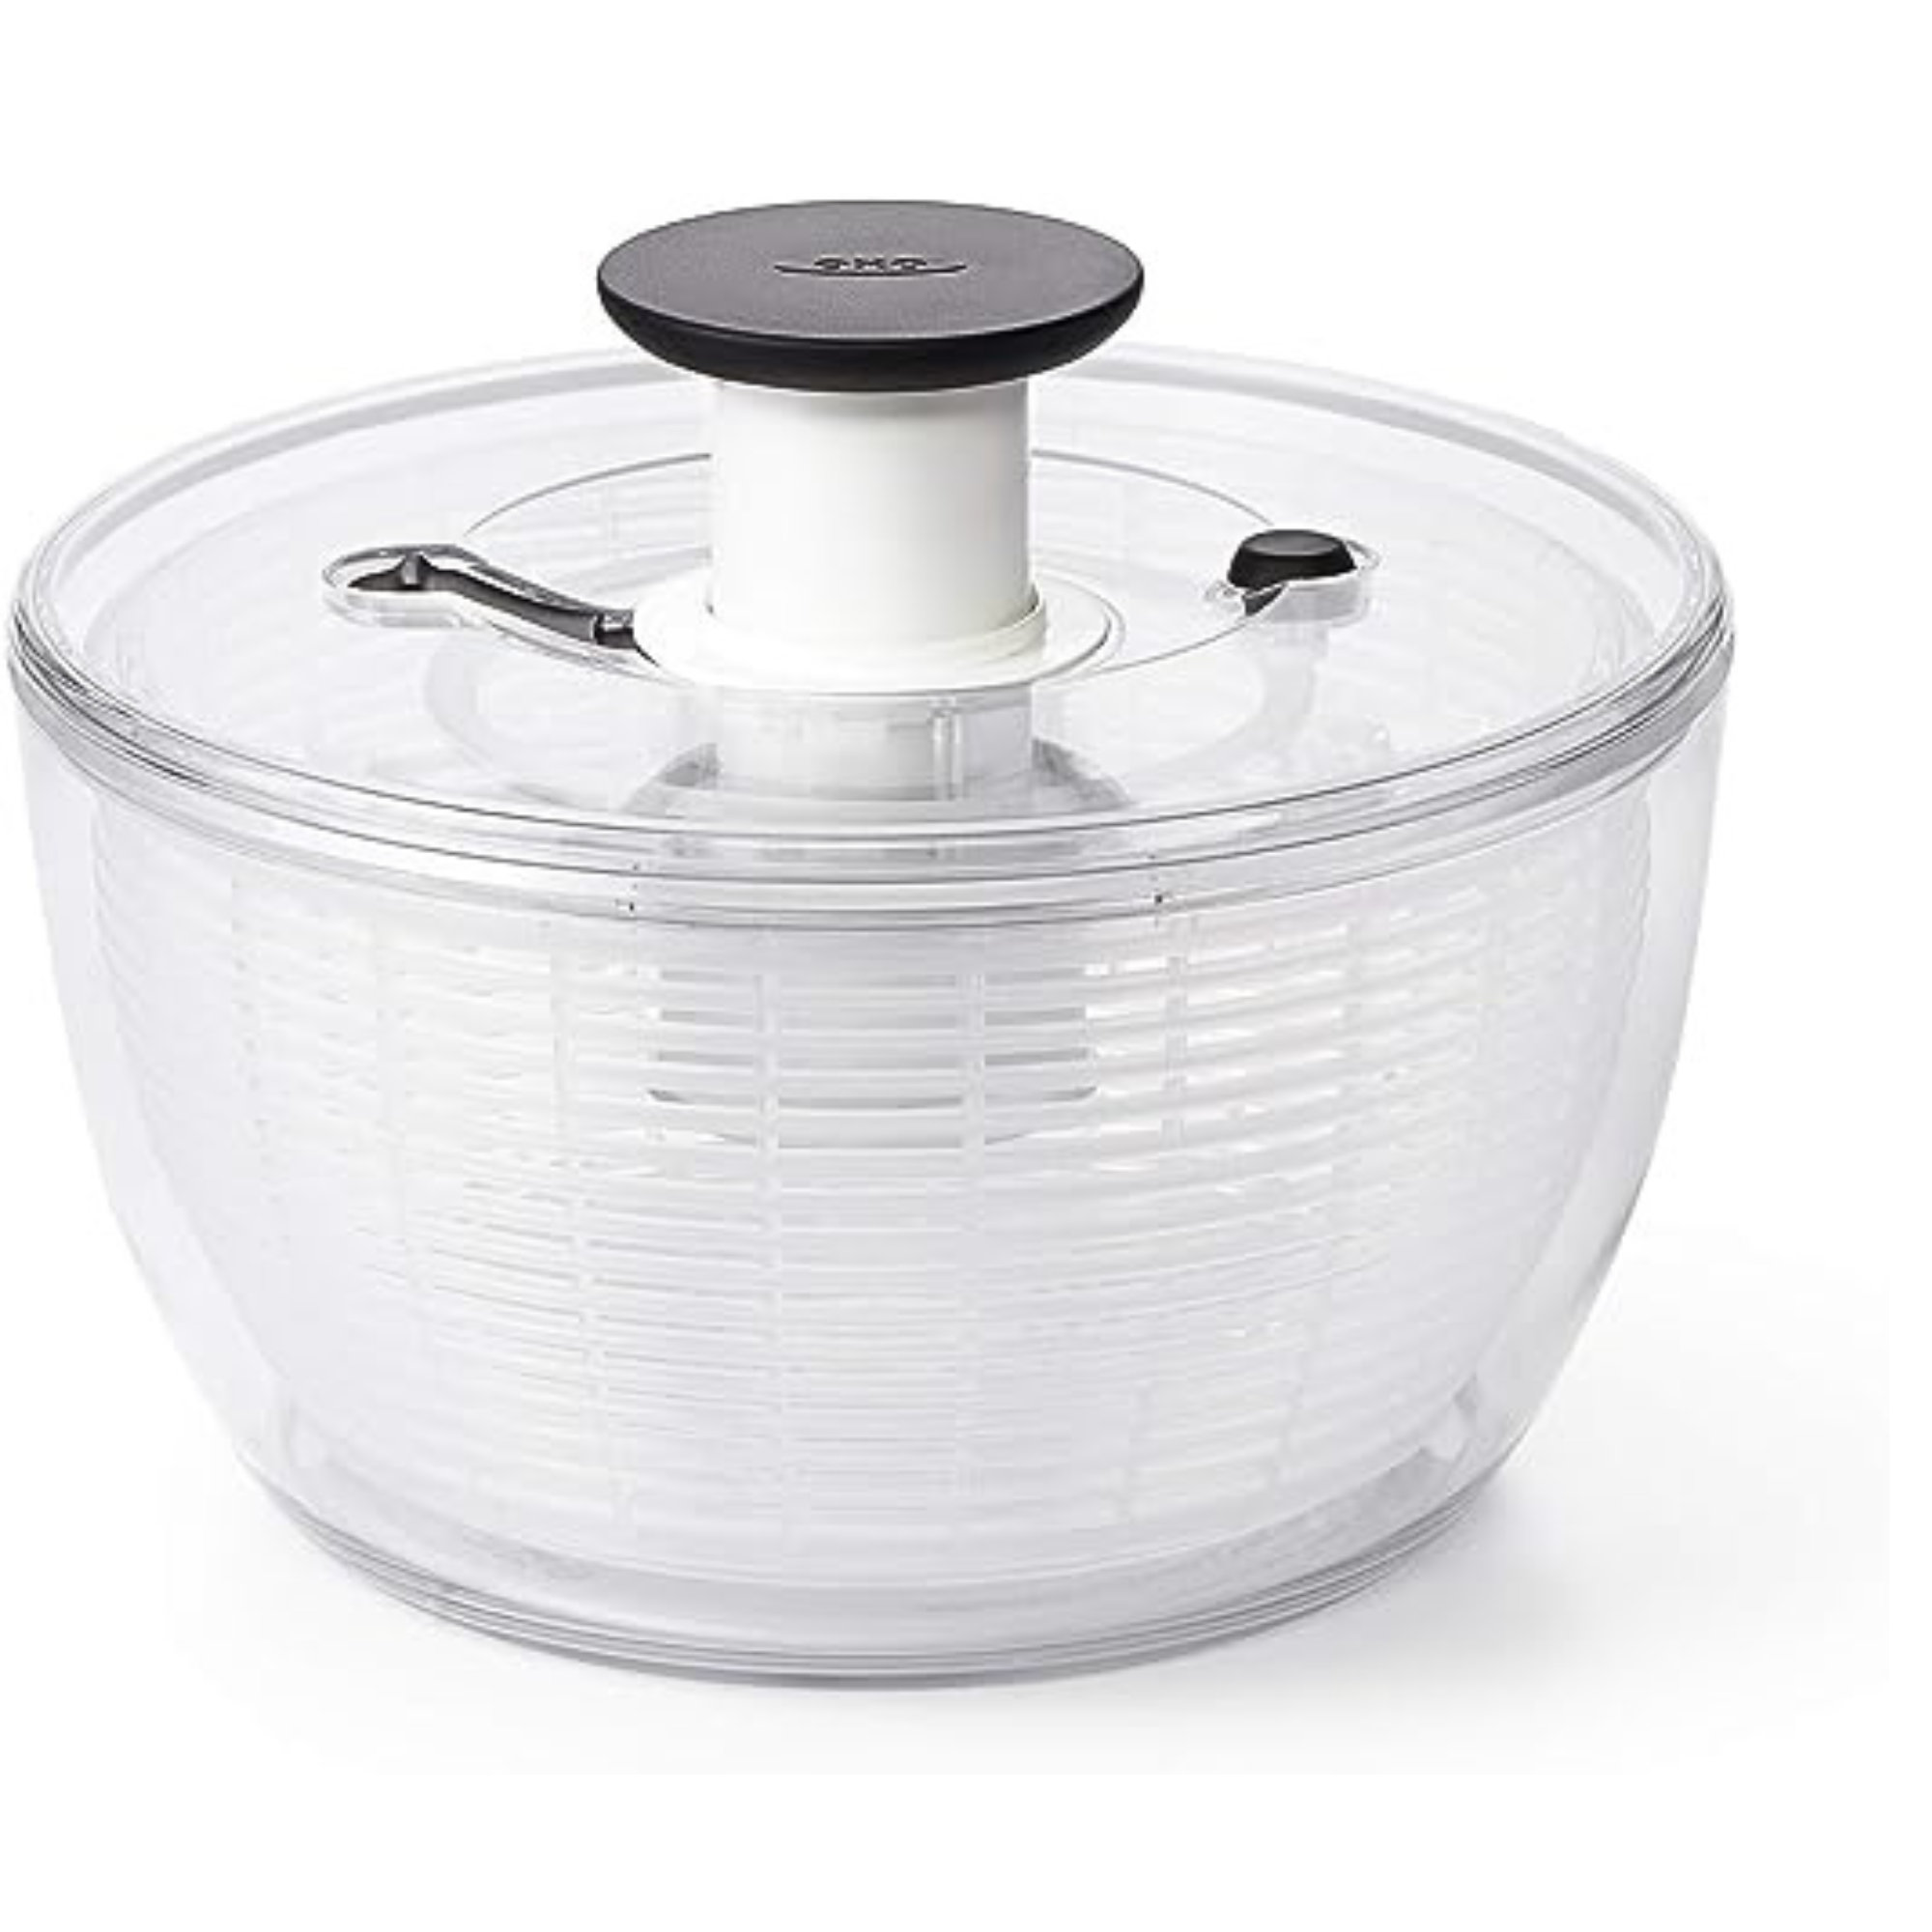 Zyliss Easy Spin 2 AquaVent Large Salad Spinner with Pull Cord & Reviews